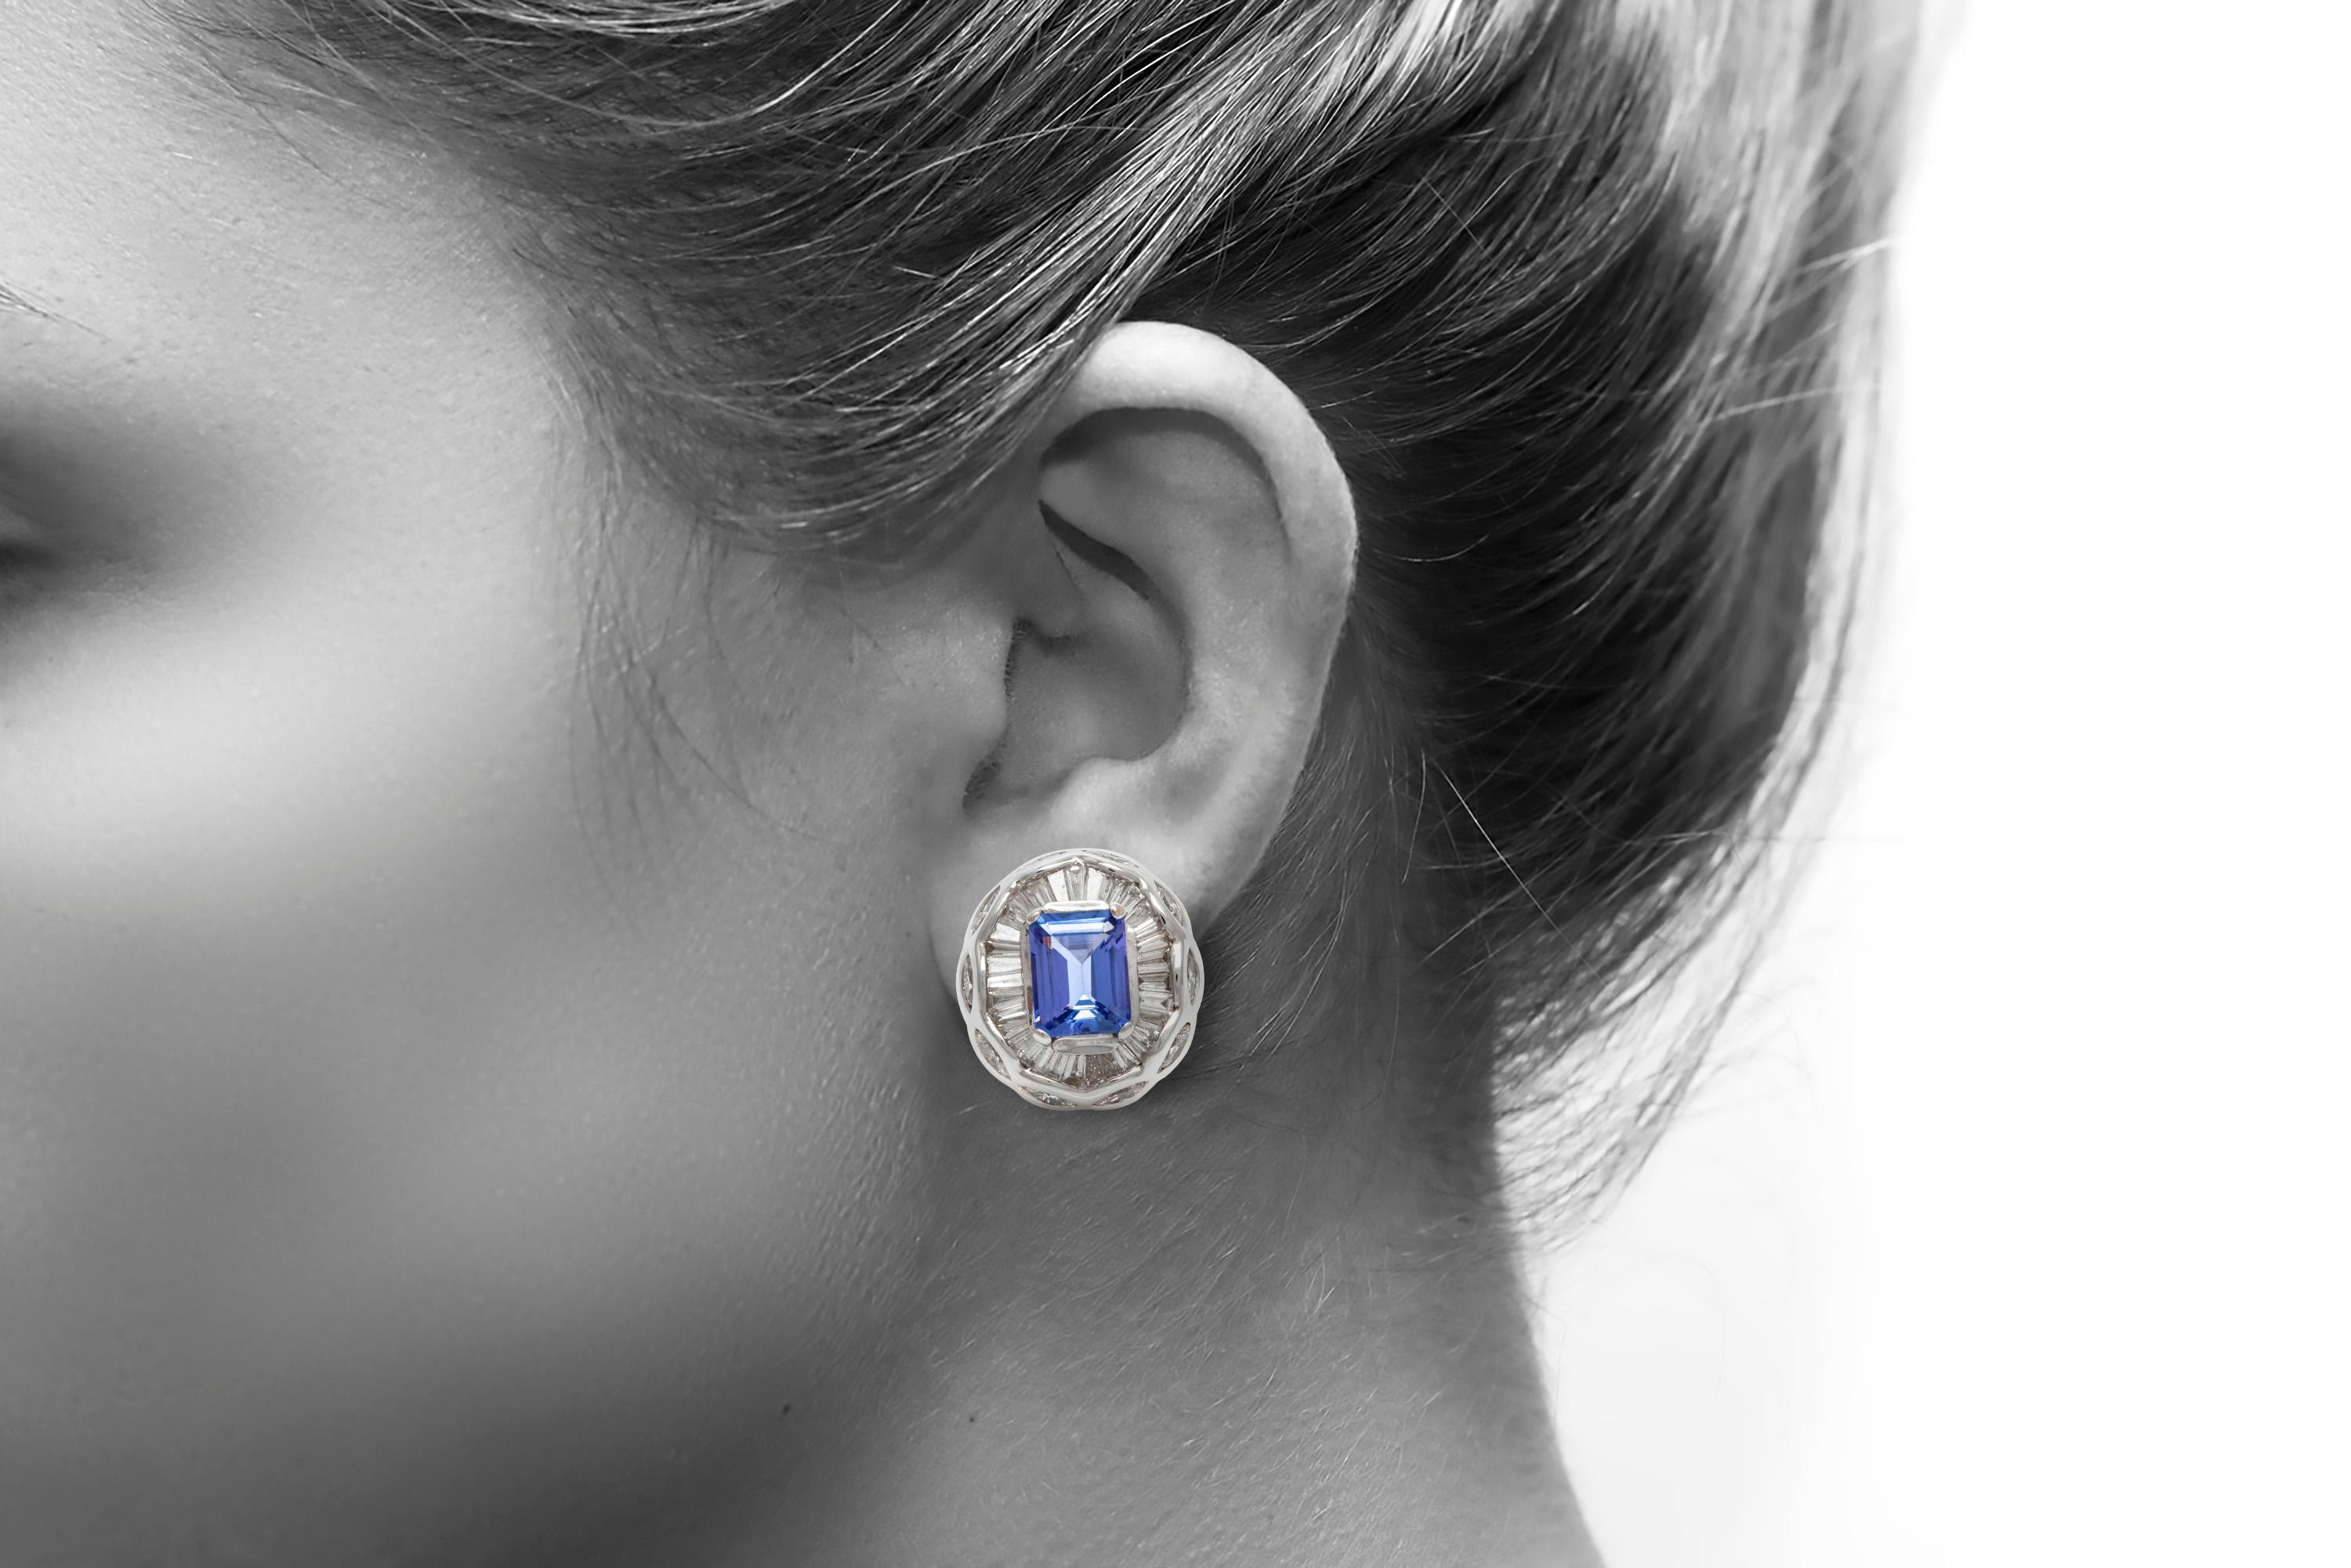 The earrings is finely crafted in 18k white gold with diamonds weighing approximately total of 4.11 carat and center stone tanzanite weighing approximately 4.60 carat.
